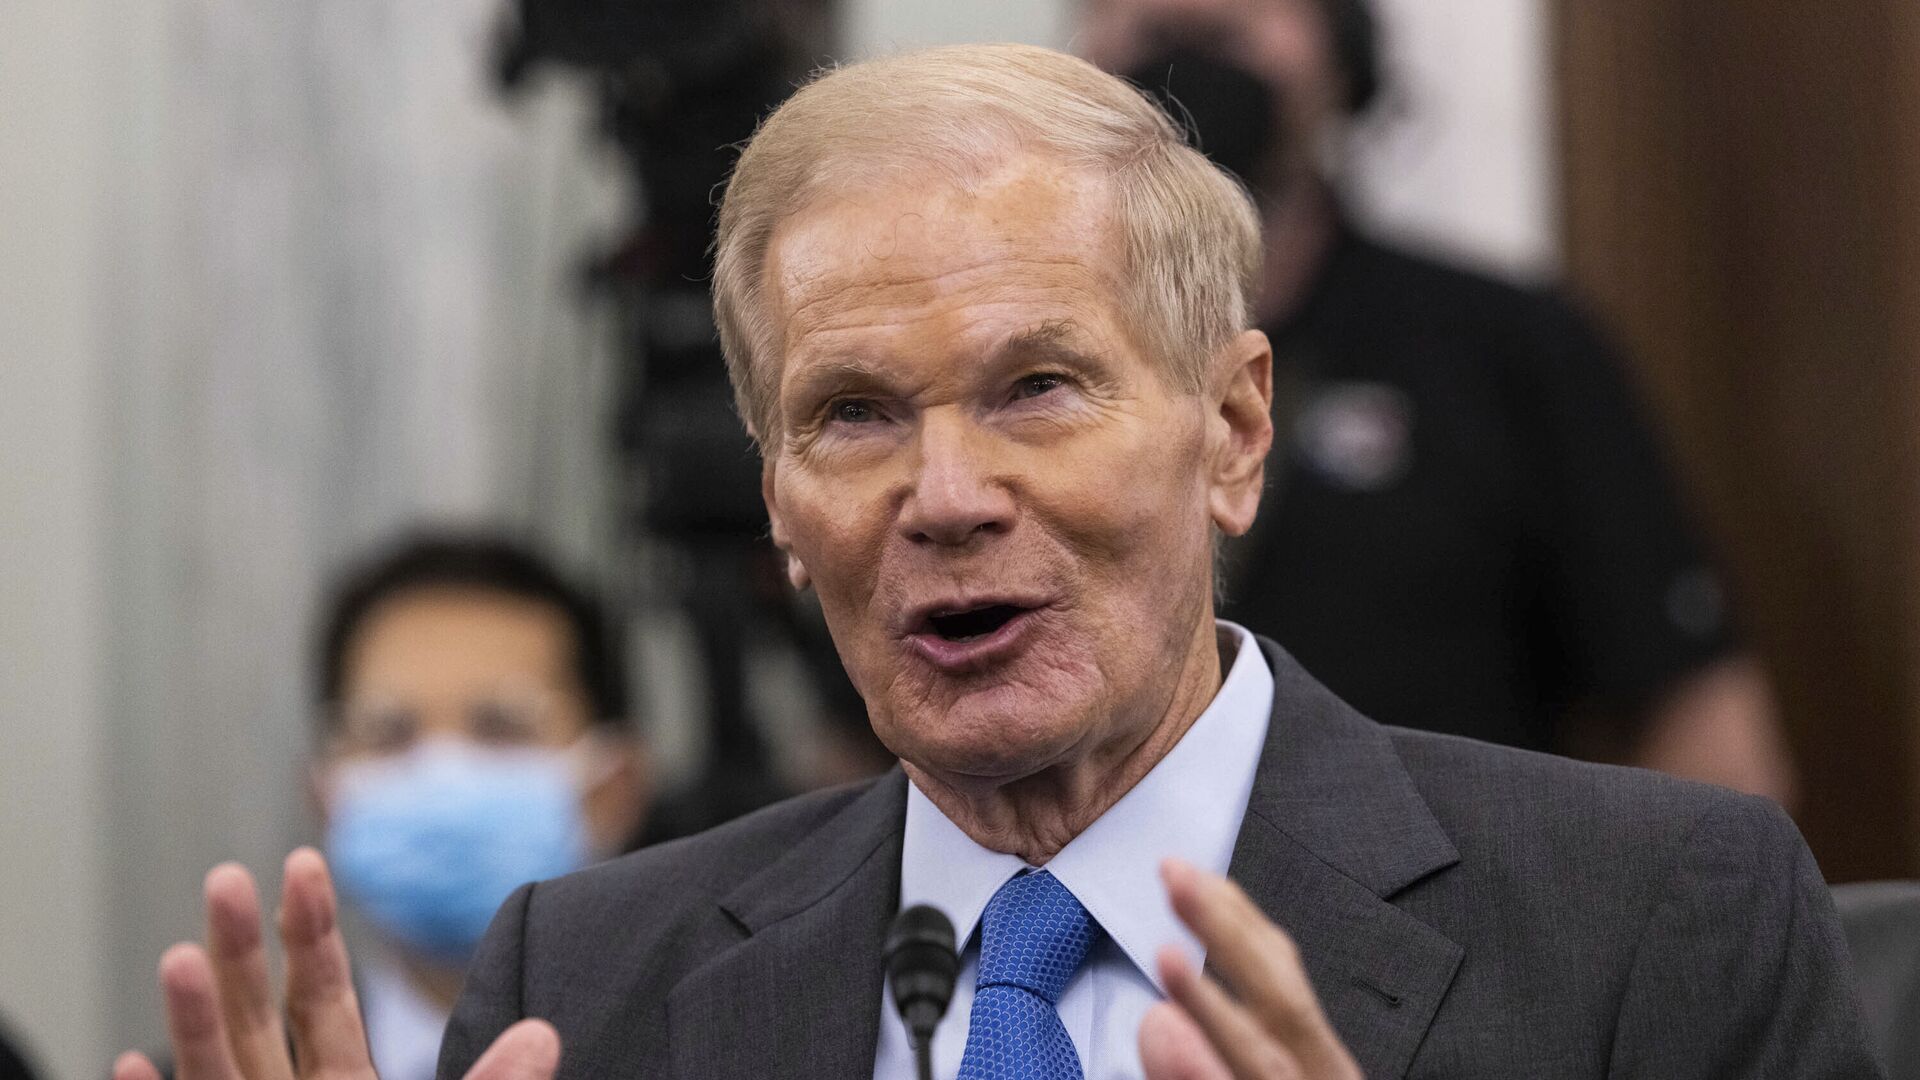 Former Sen. Bill Nelson, nominee to be administrator of NASA, testifies during a Senate Committee on Commerce, Science, and Transportation confirmation hearing, Wednesday, April 21, 2021 on Capitol Hill in Washington. - Sputnik International, 1920, 08.07.2021